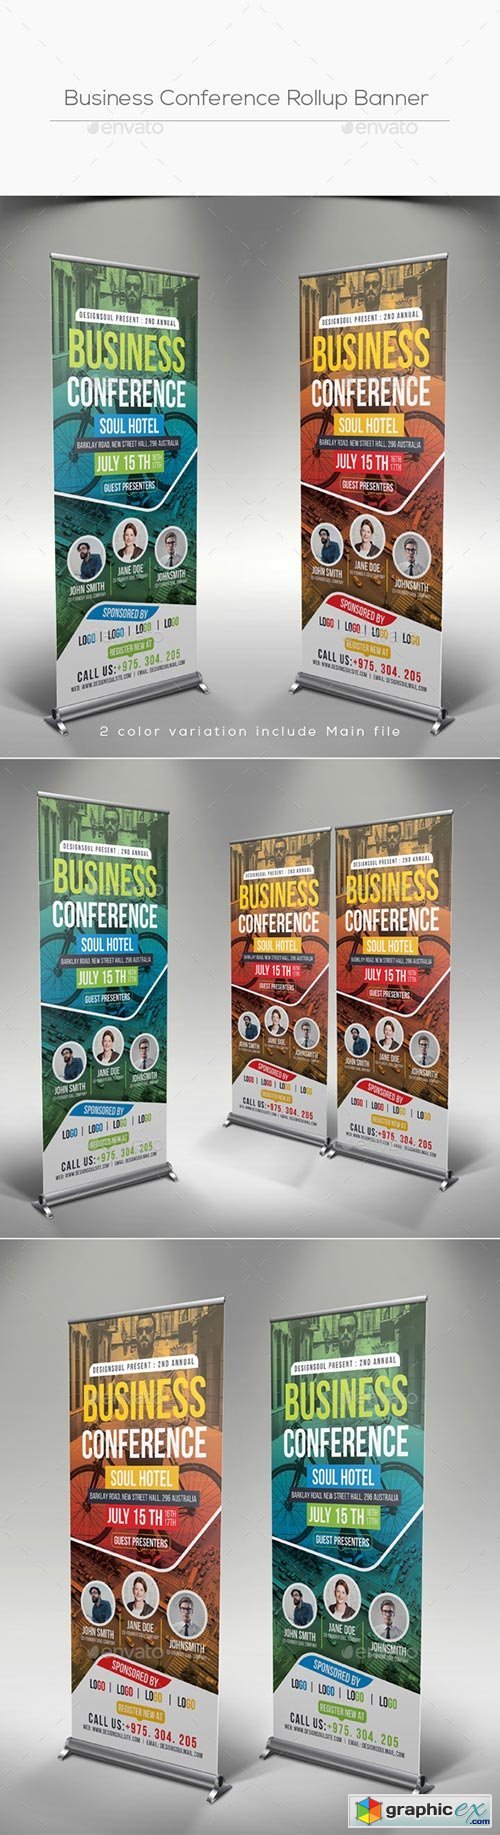 Business Conference Rollup Banner